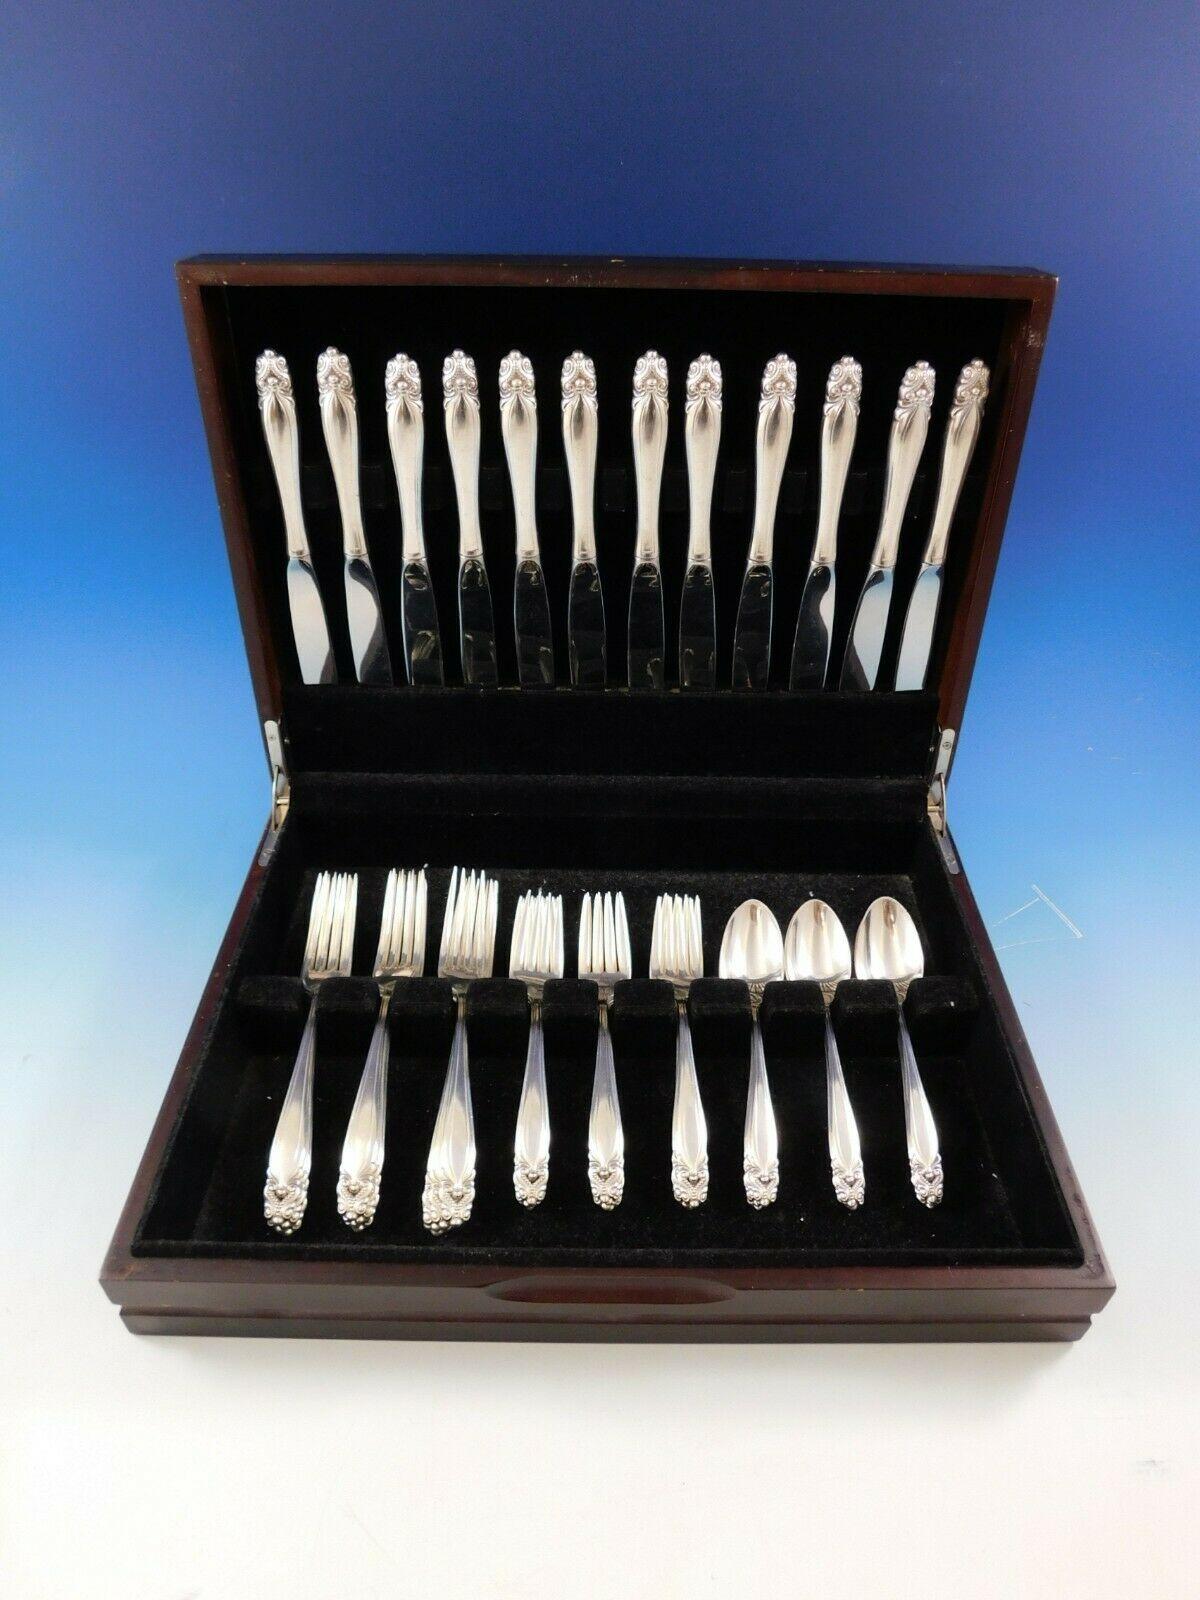 Heirloom quality King Christian by Wallace sterling silver flatware set, 48 pieces. This set includes:

12 knives, 9